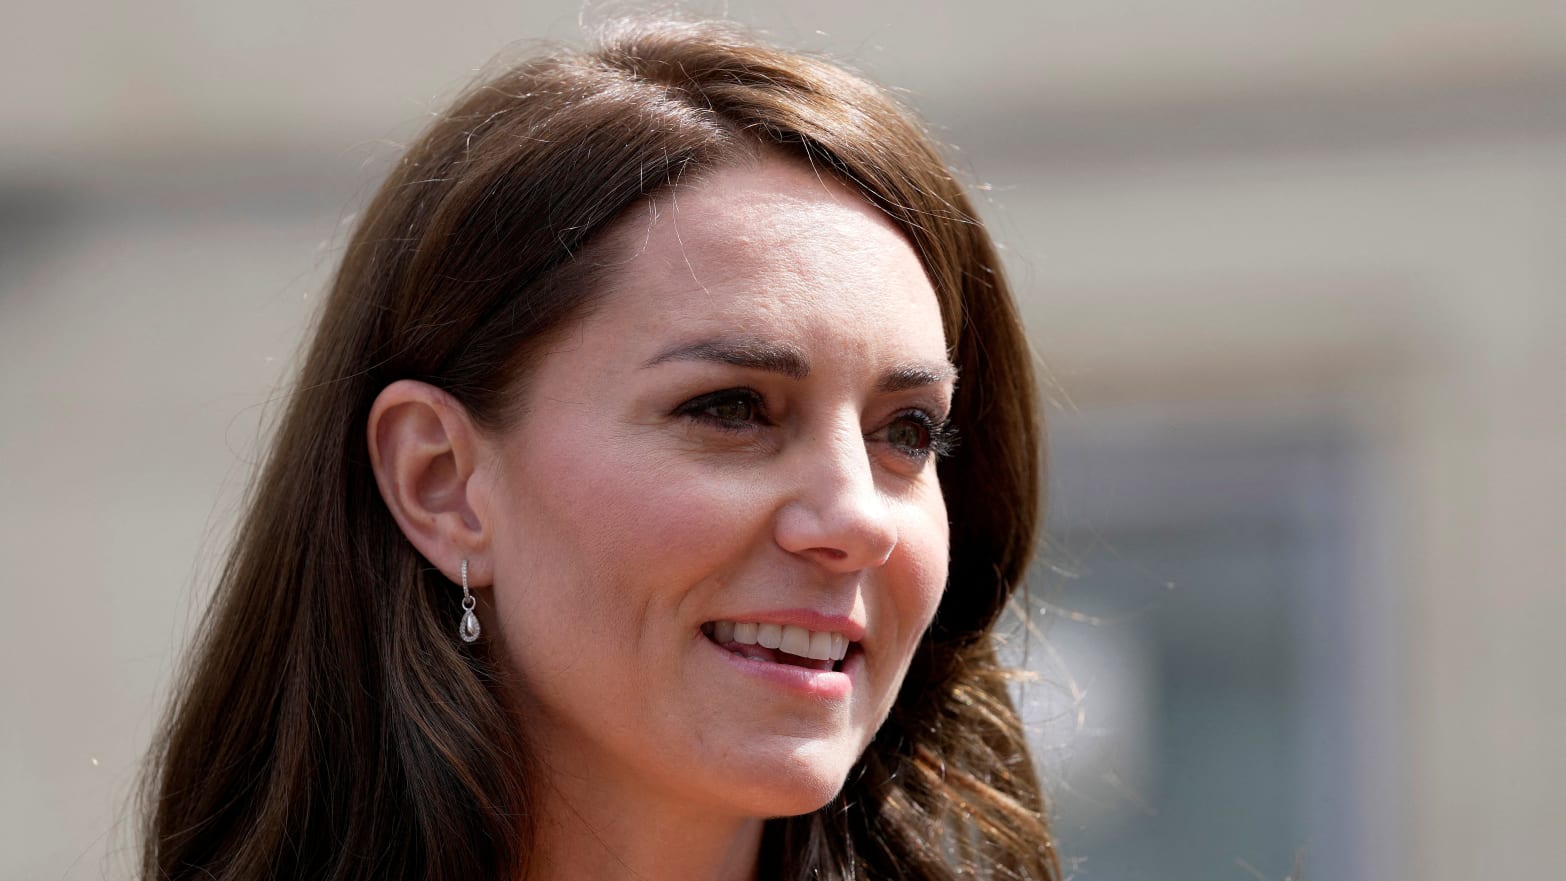 Kate Middleton, Princess of Wales, is out of the hospital after spending 14 days there for abdominal surgery.